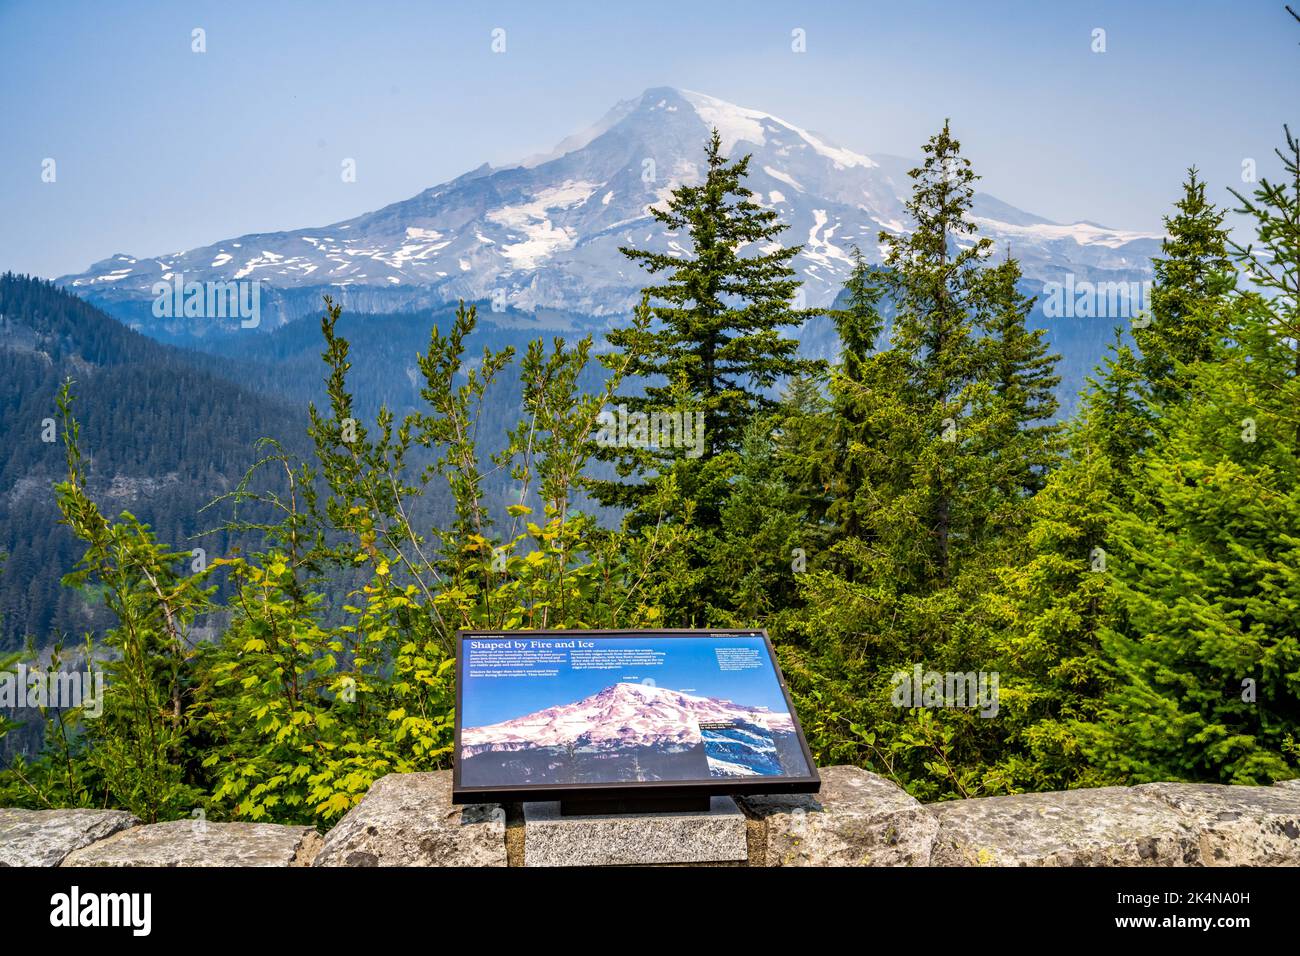 Mt Rainer NP, WA, USA - August 14, 2021: Shaped by Fire and Ice Stock Photo